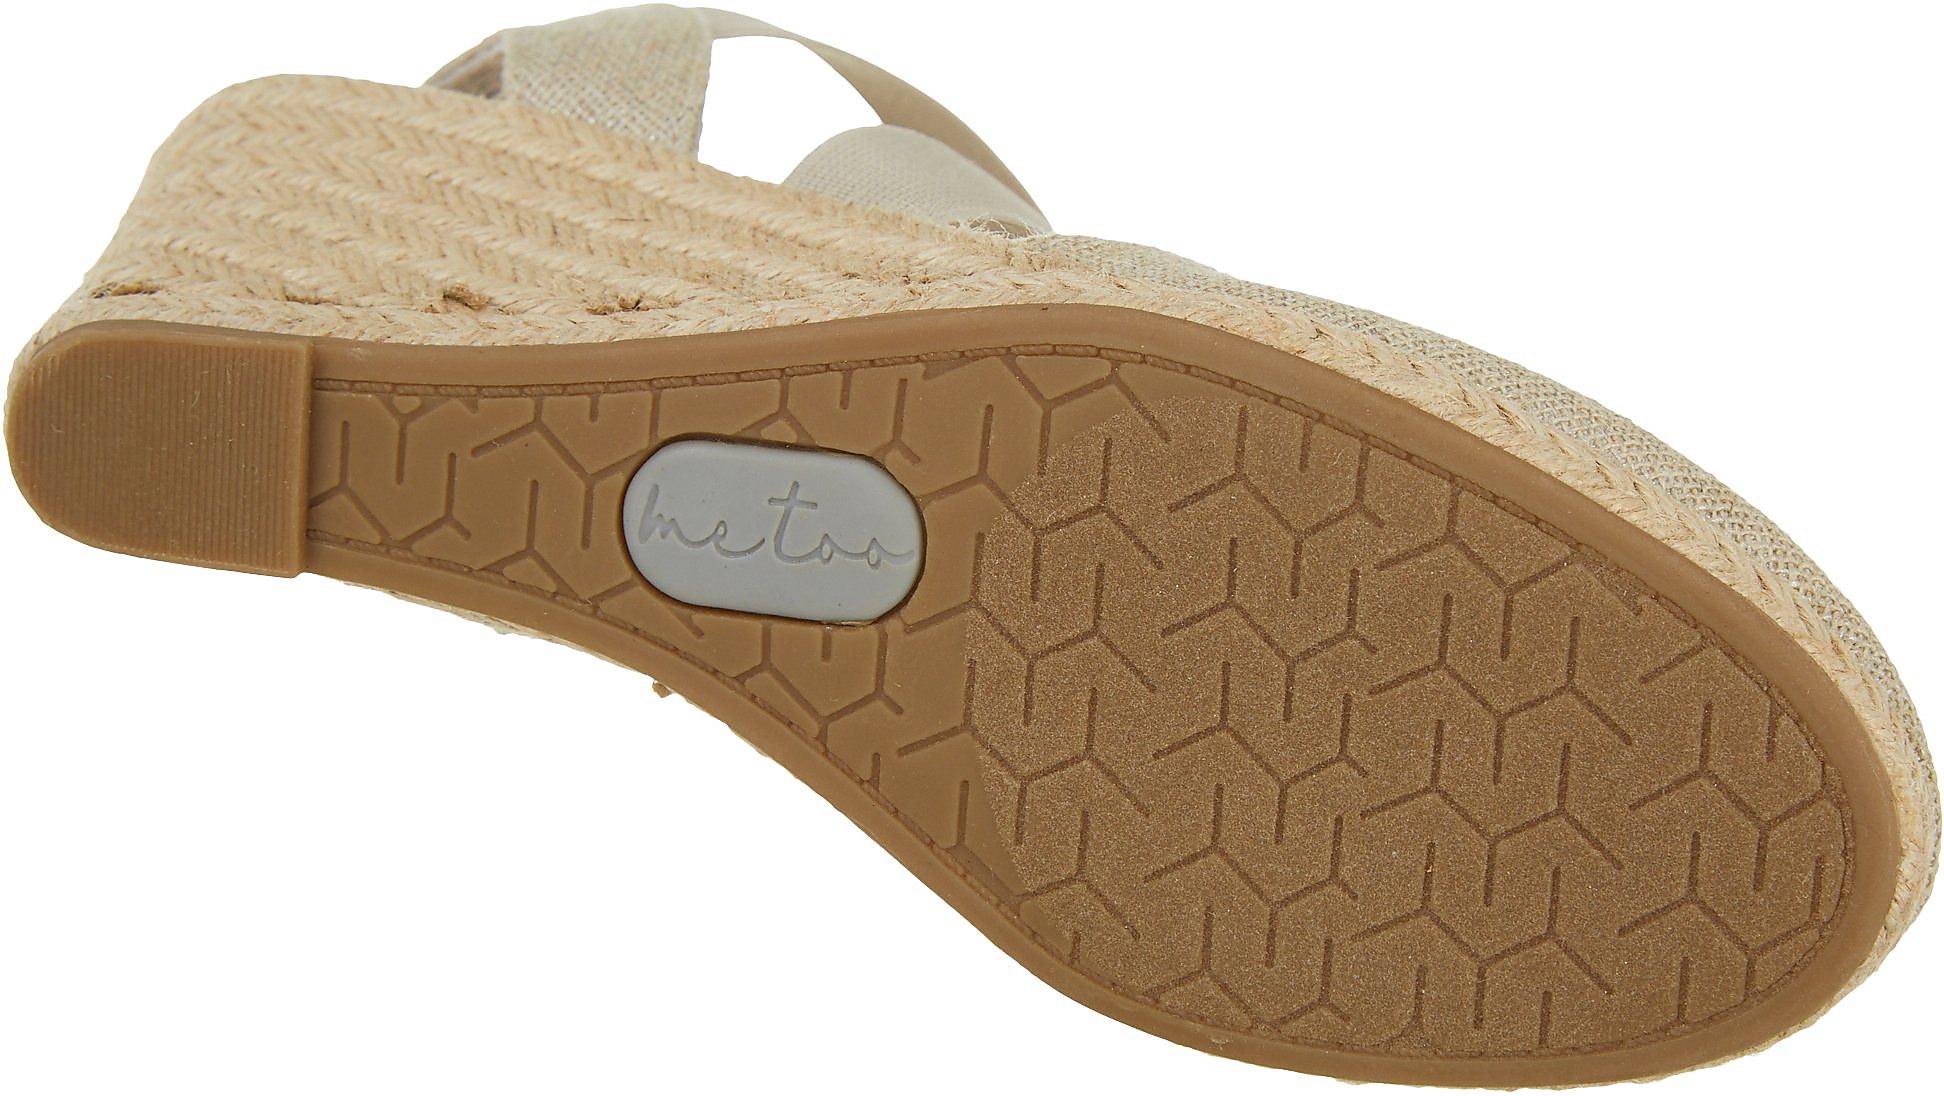 Me Too Womens Brinly Wedge Sandals | eBay